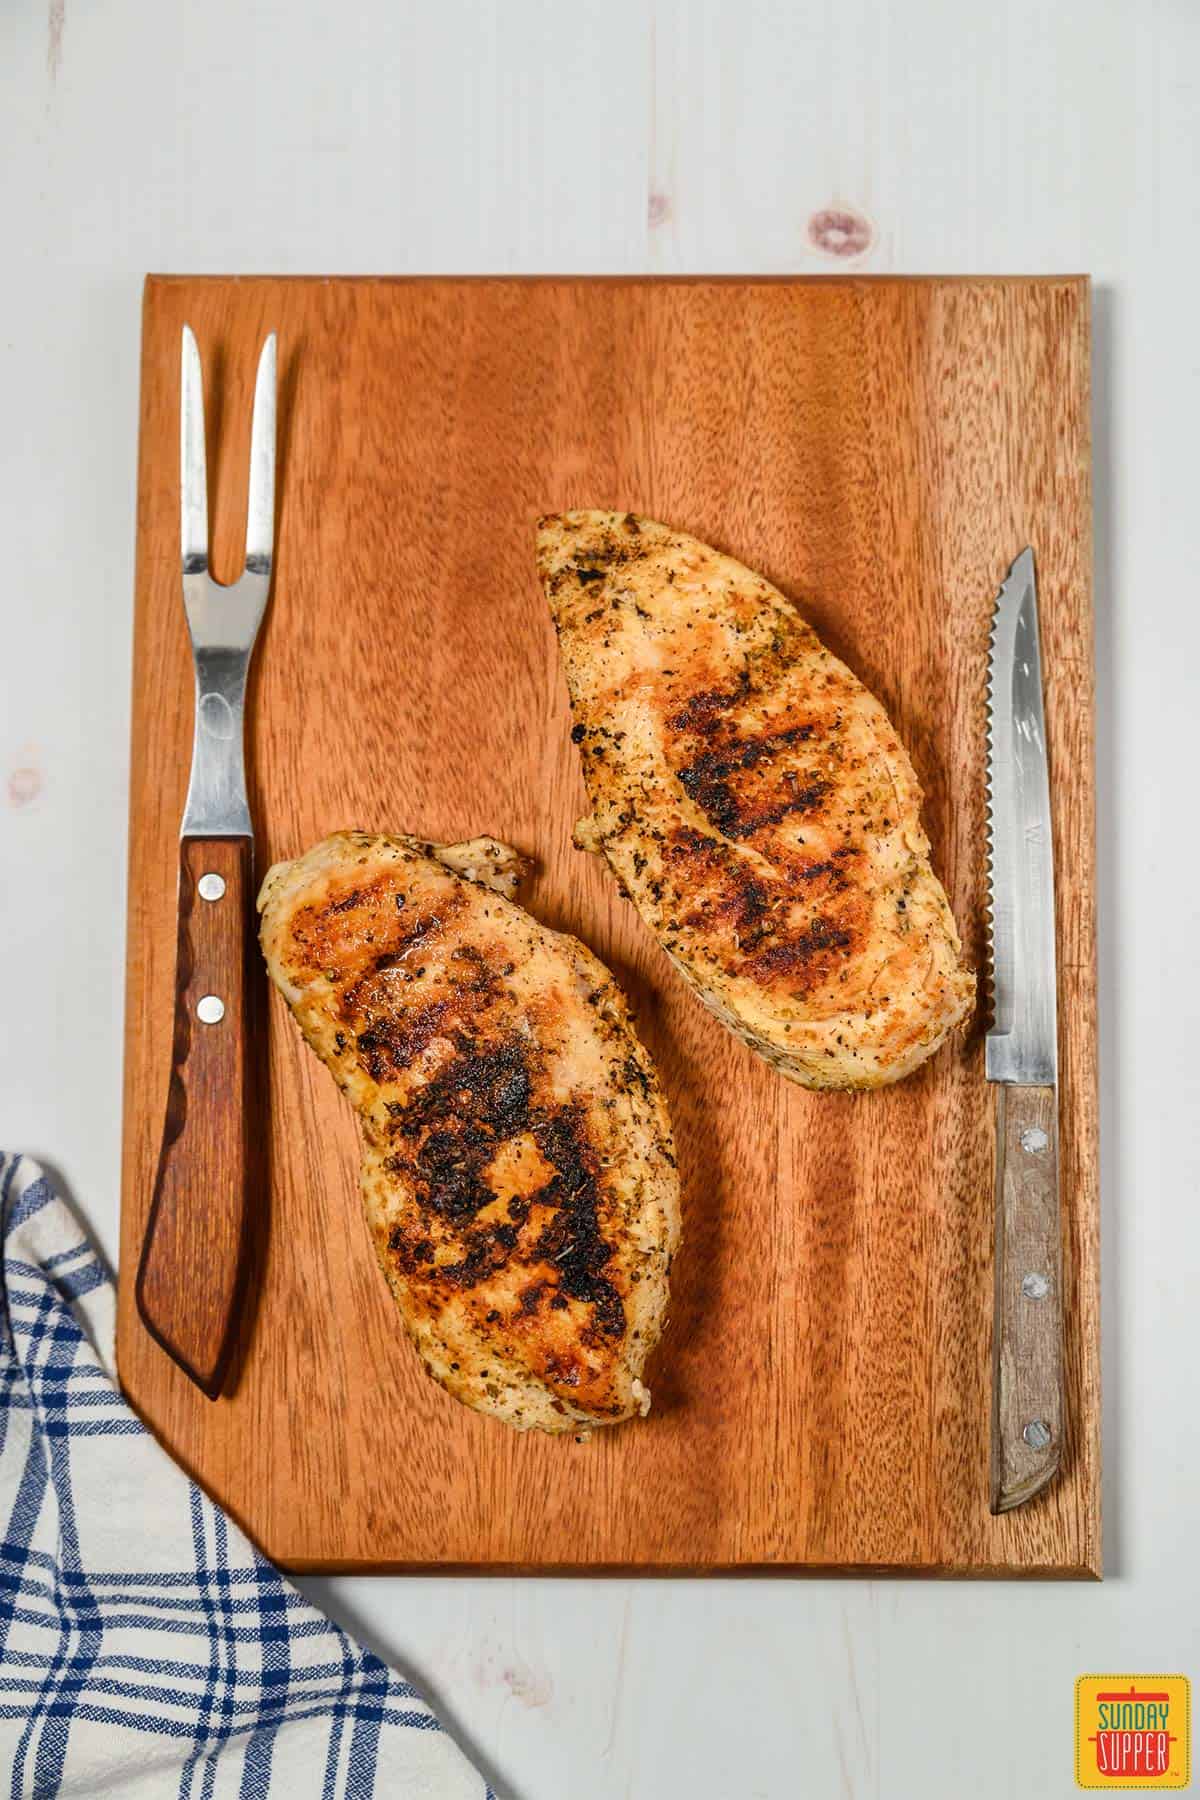 Griled chicken on a cutting board